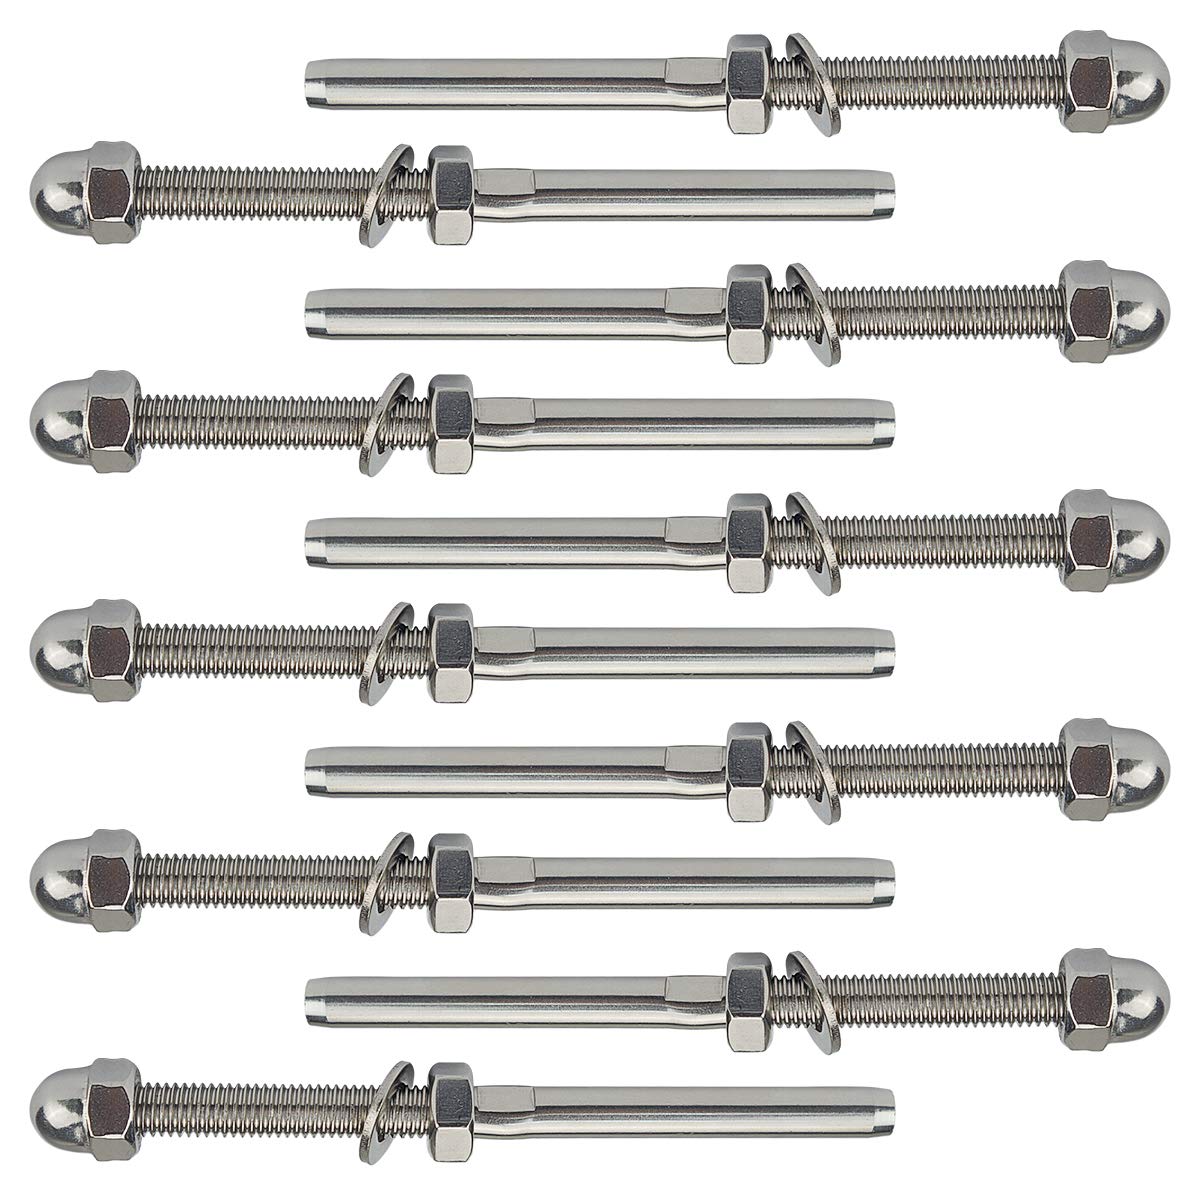 MUZATA Hand Swage Threaded Stud Tension End Fitting Terminal for 1/8 Cable Railing Kit,T316 Stainless Steel 6 Long for 4x4 to 6x6 Deck Wood Metal Posts 10Pack CR39,Series CA1